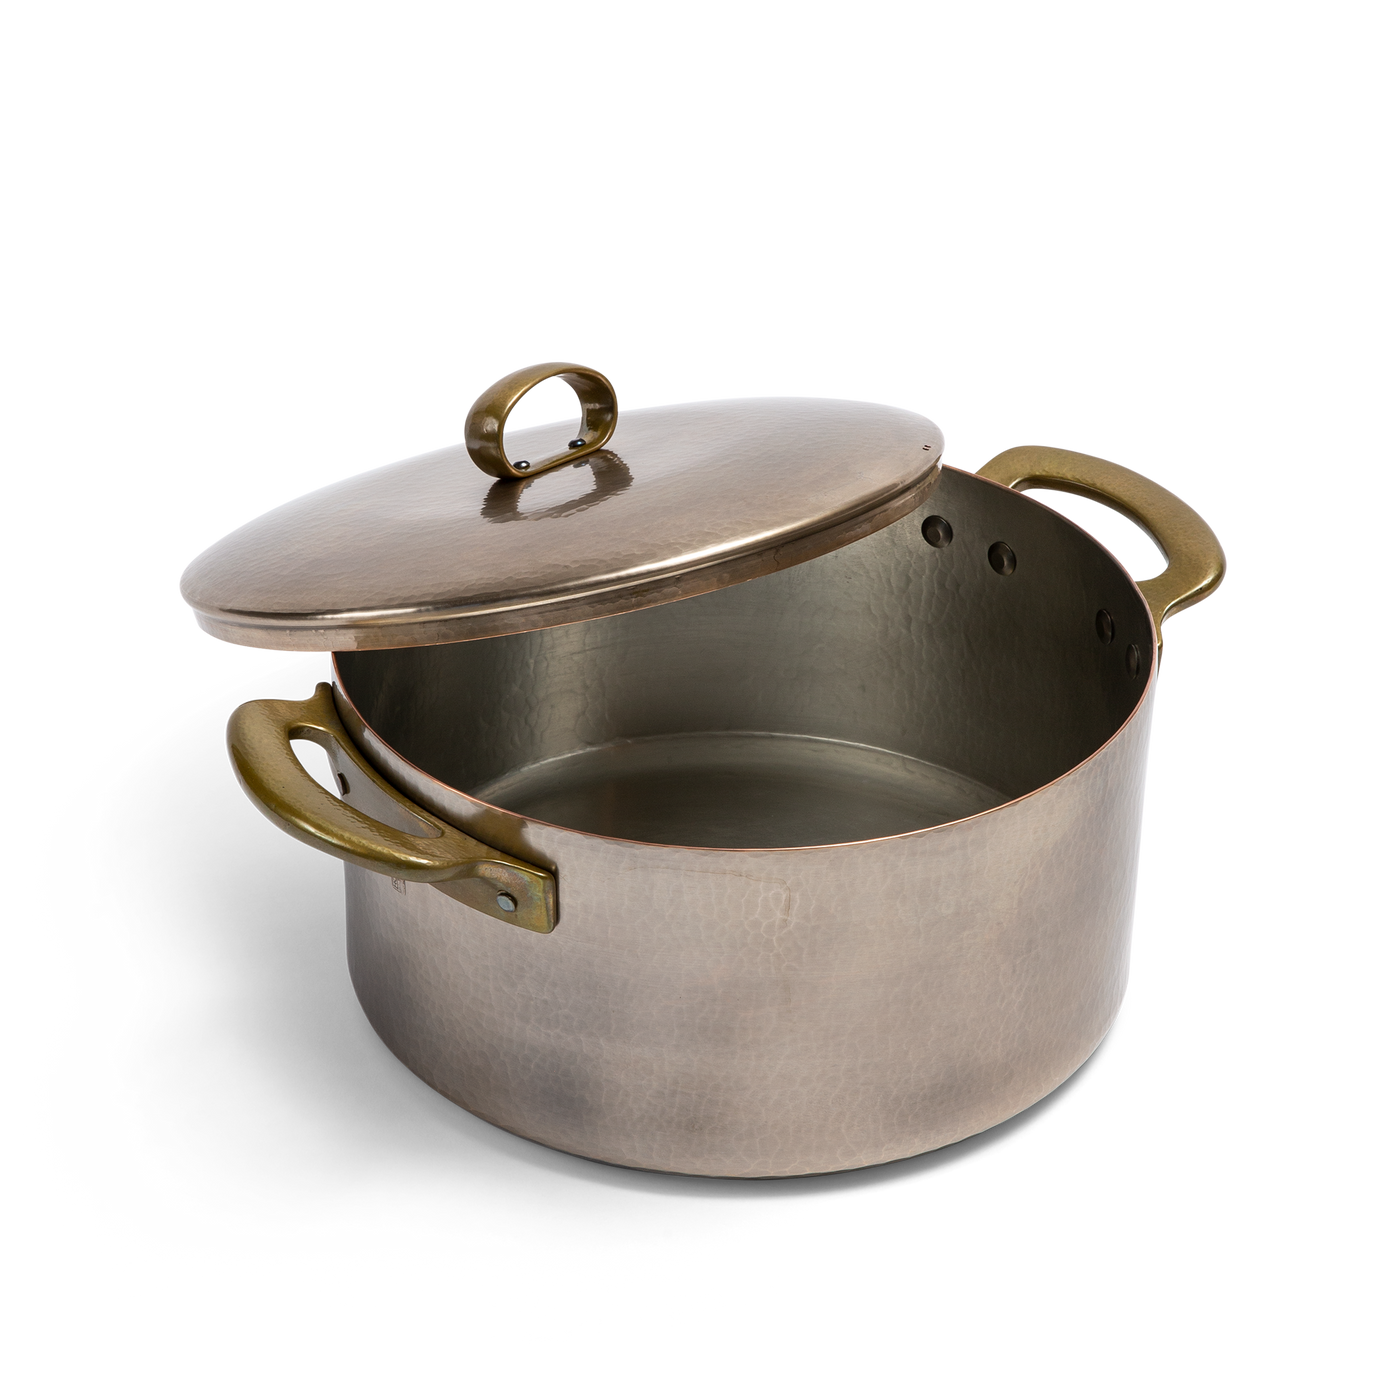 Two-handed stock pot with lid - 5 quarts